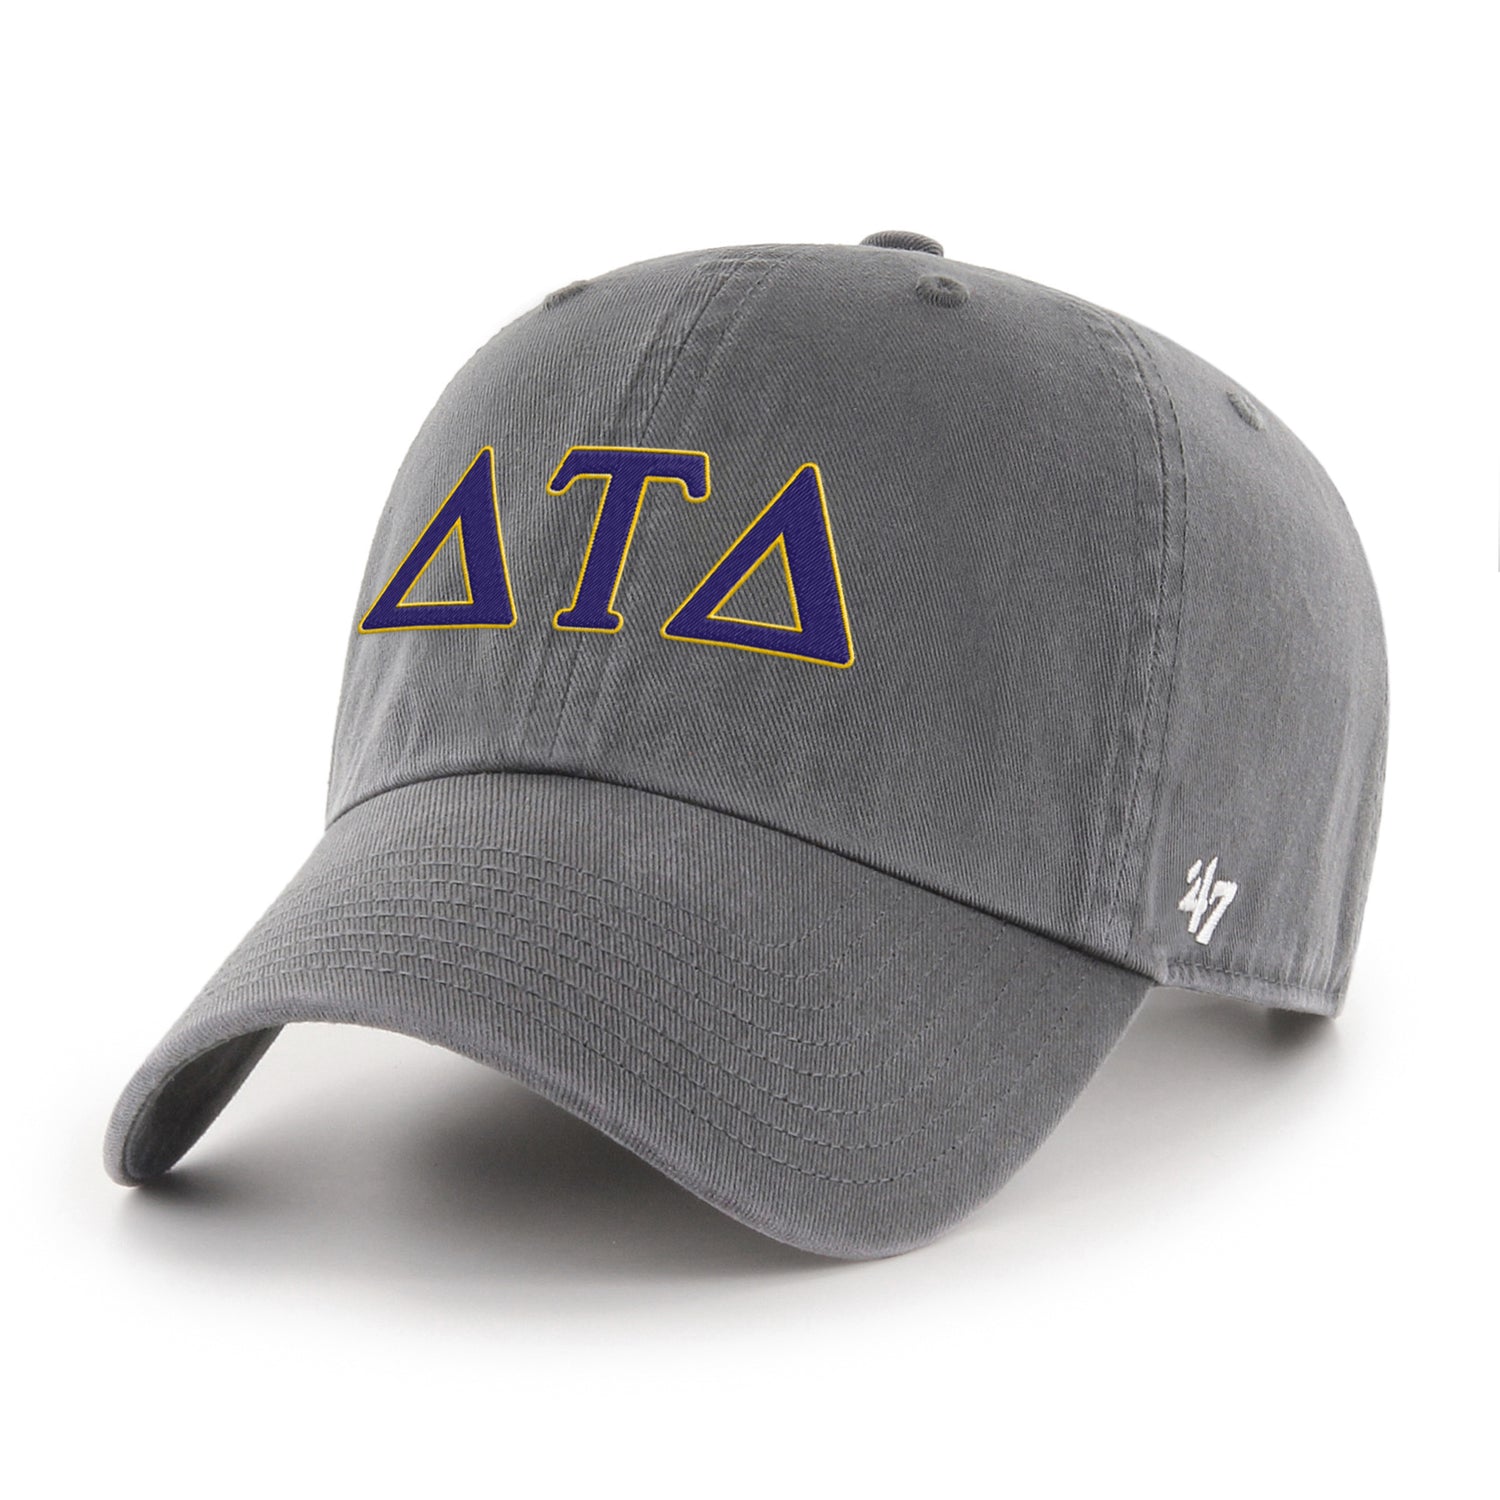 Delta tau delta '47 brand clean up hat in charcoal grey gray with purple embroidery